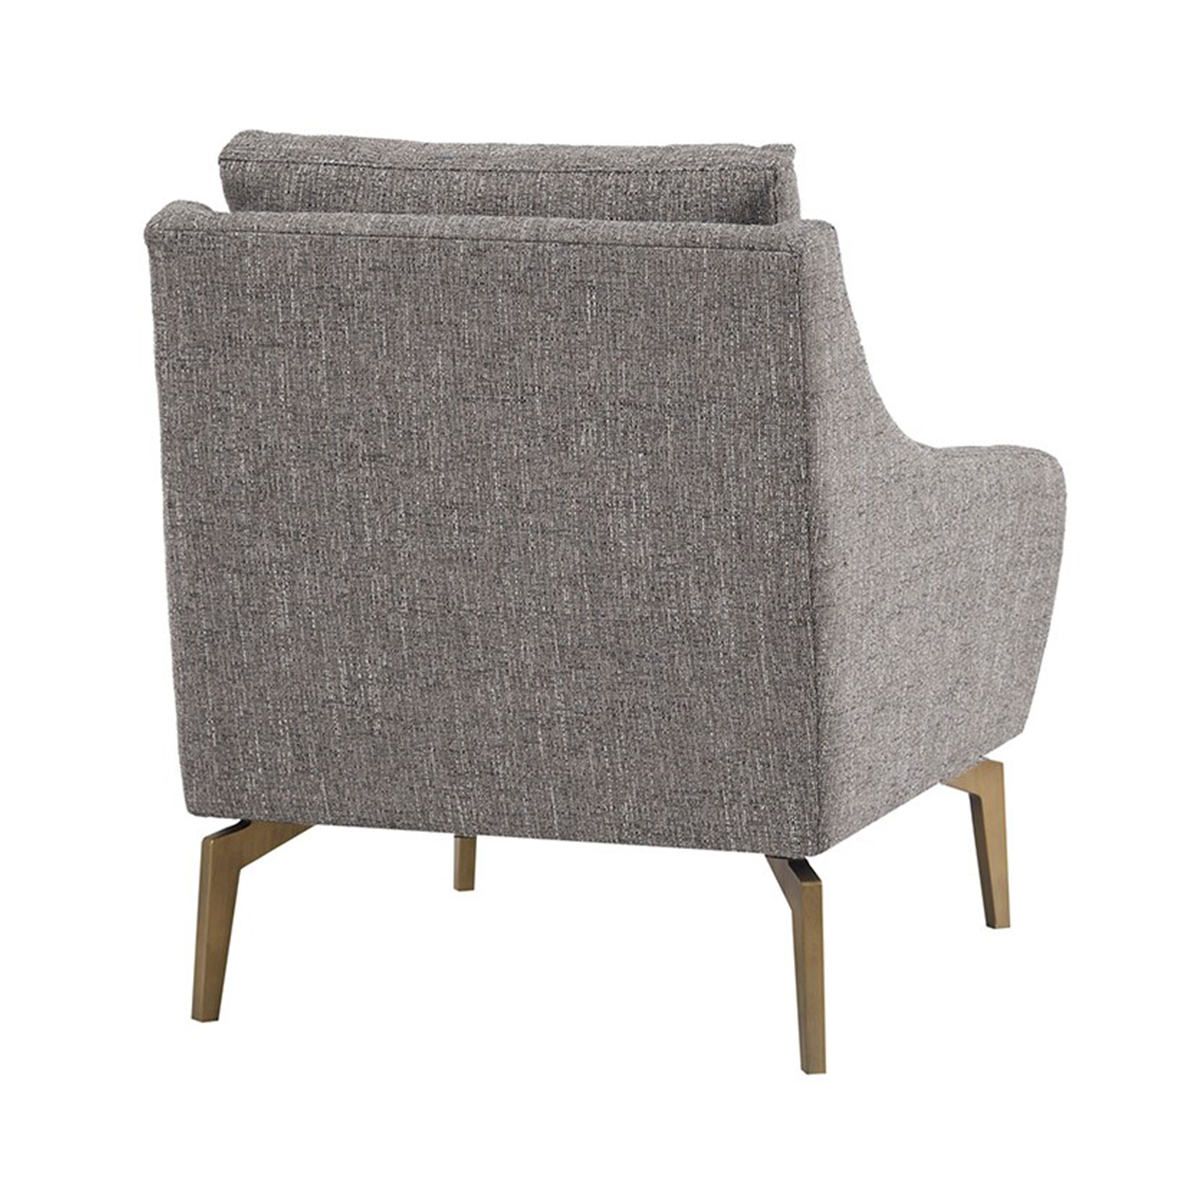 Picture of WATSON ACCENT CHAIR